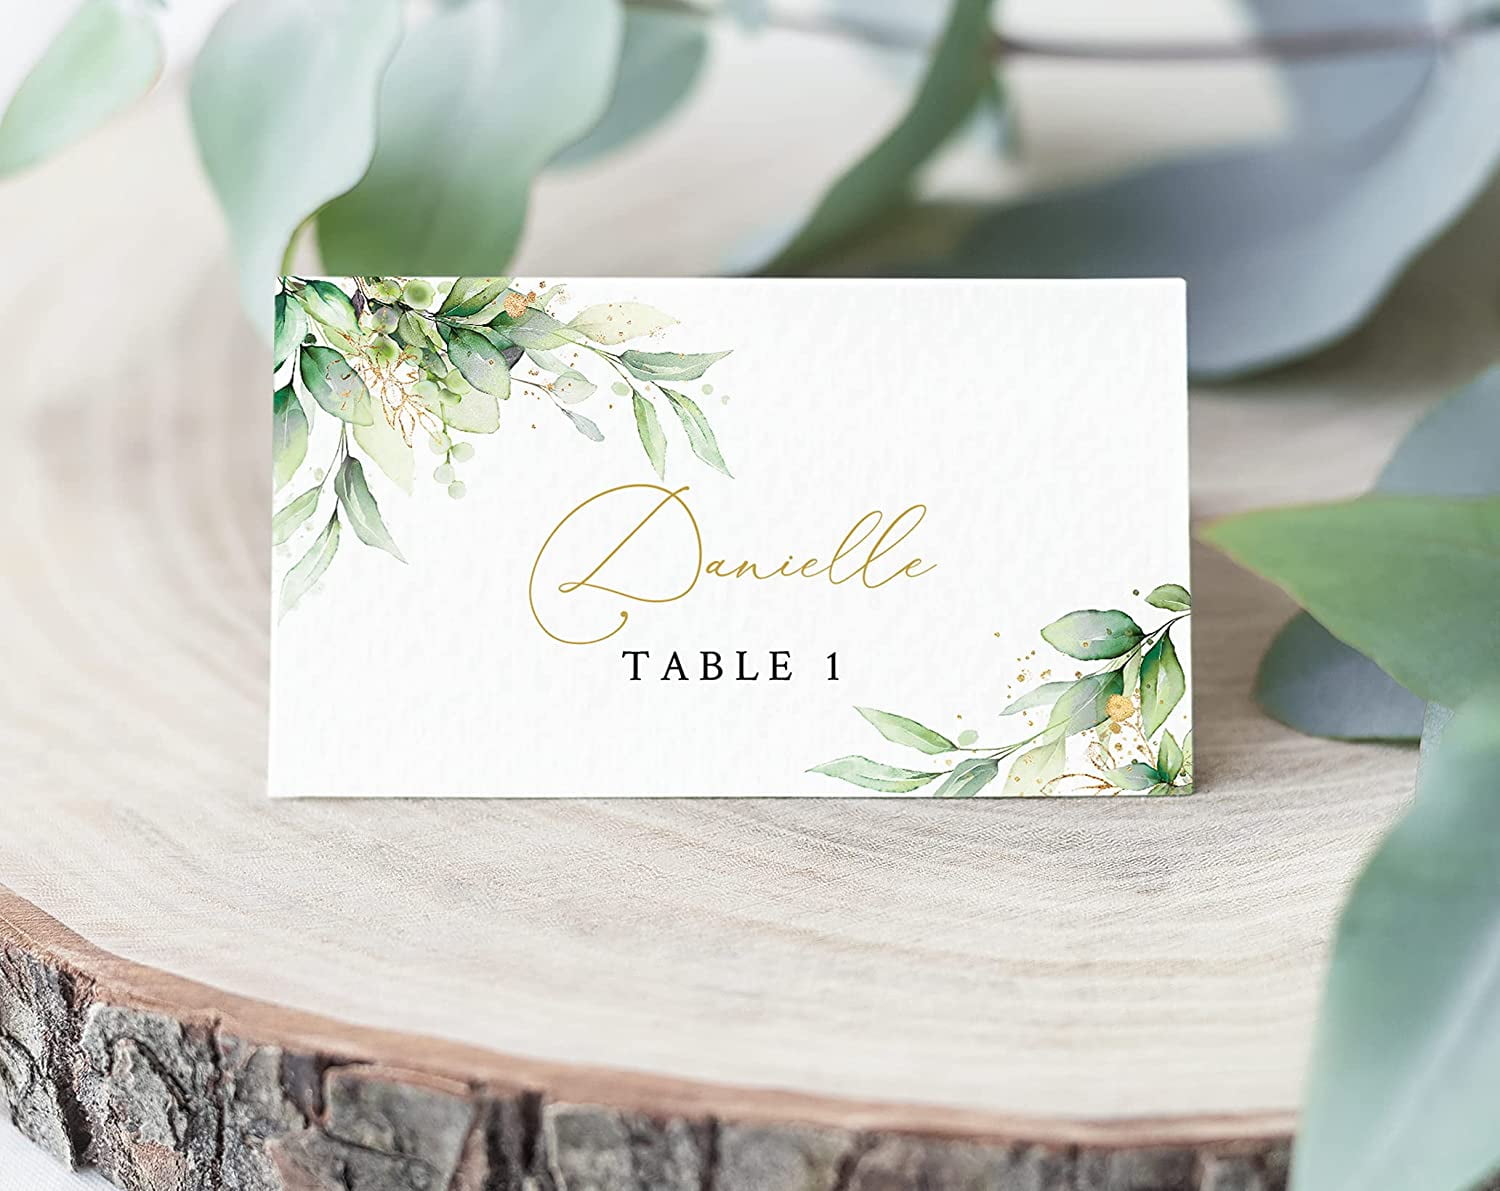 Escort Seating Cards Charcuterie Board Accessories Wedding Name Cards 50 Pack 2 x 3.5 in Gold & Greenery Place Cards Scored for Easy Folding Rustic Wedding Decor Cheese Marker 